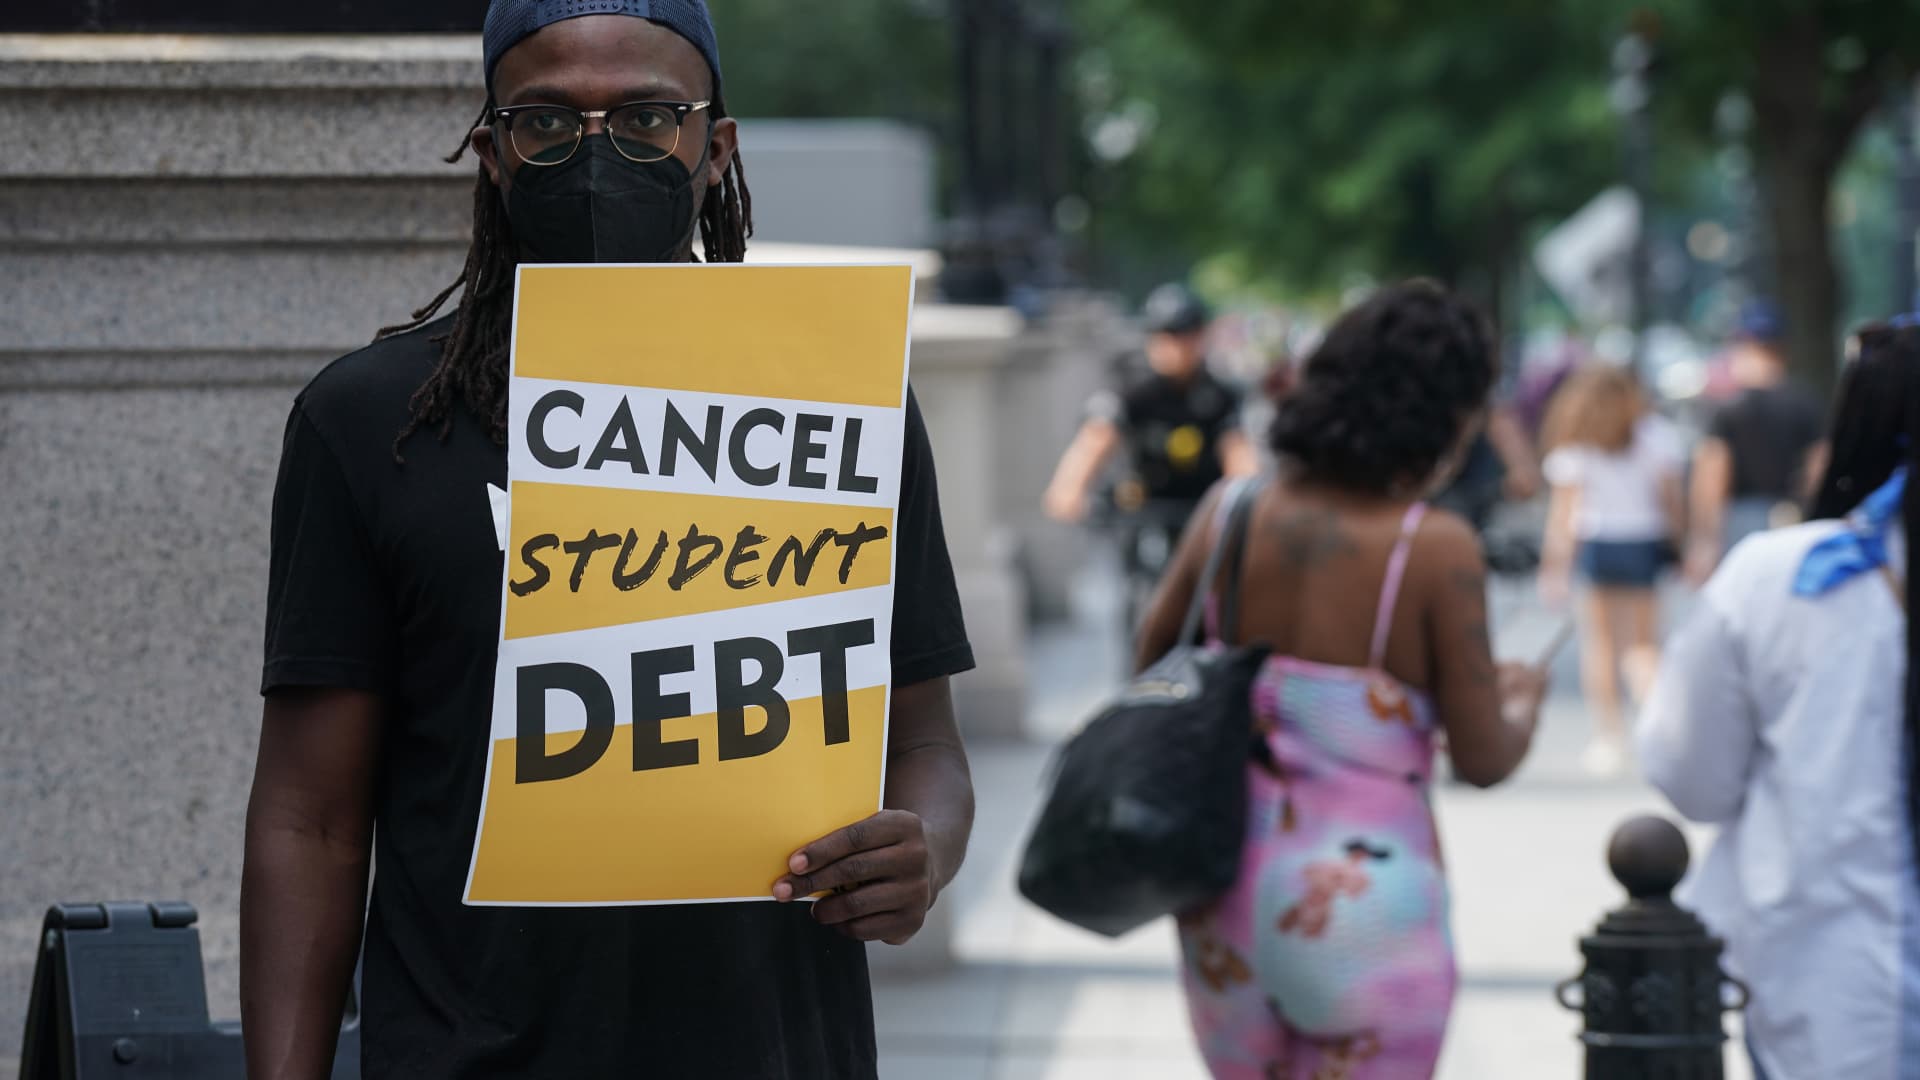 Supreme Court likely to rule that Biden student loan plan is illegal, experts say. Here's what that means for borrowers